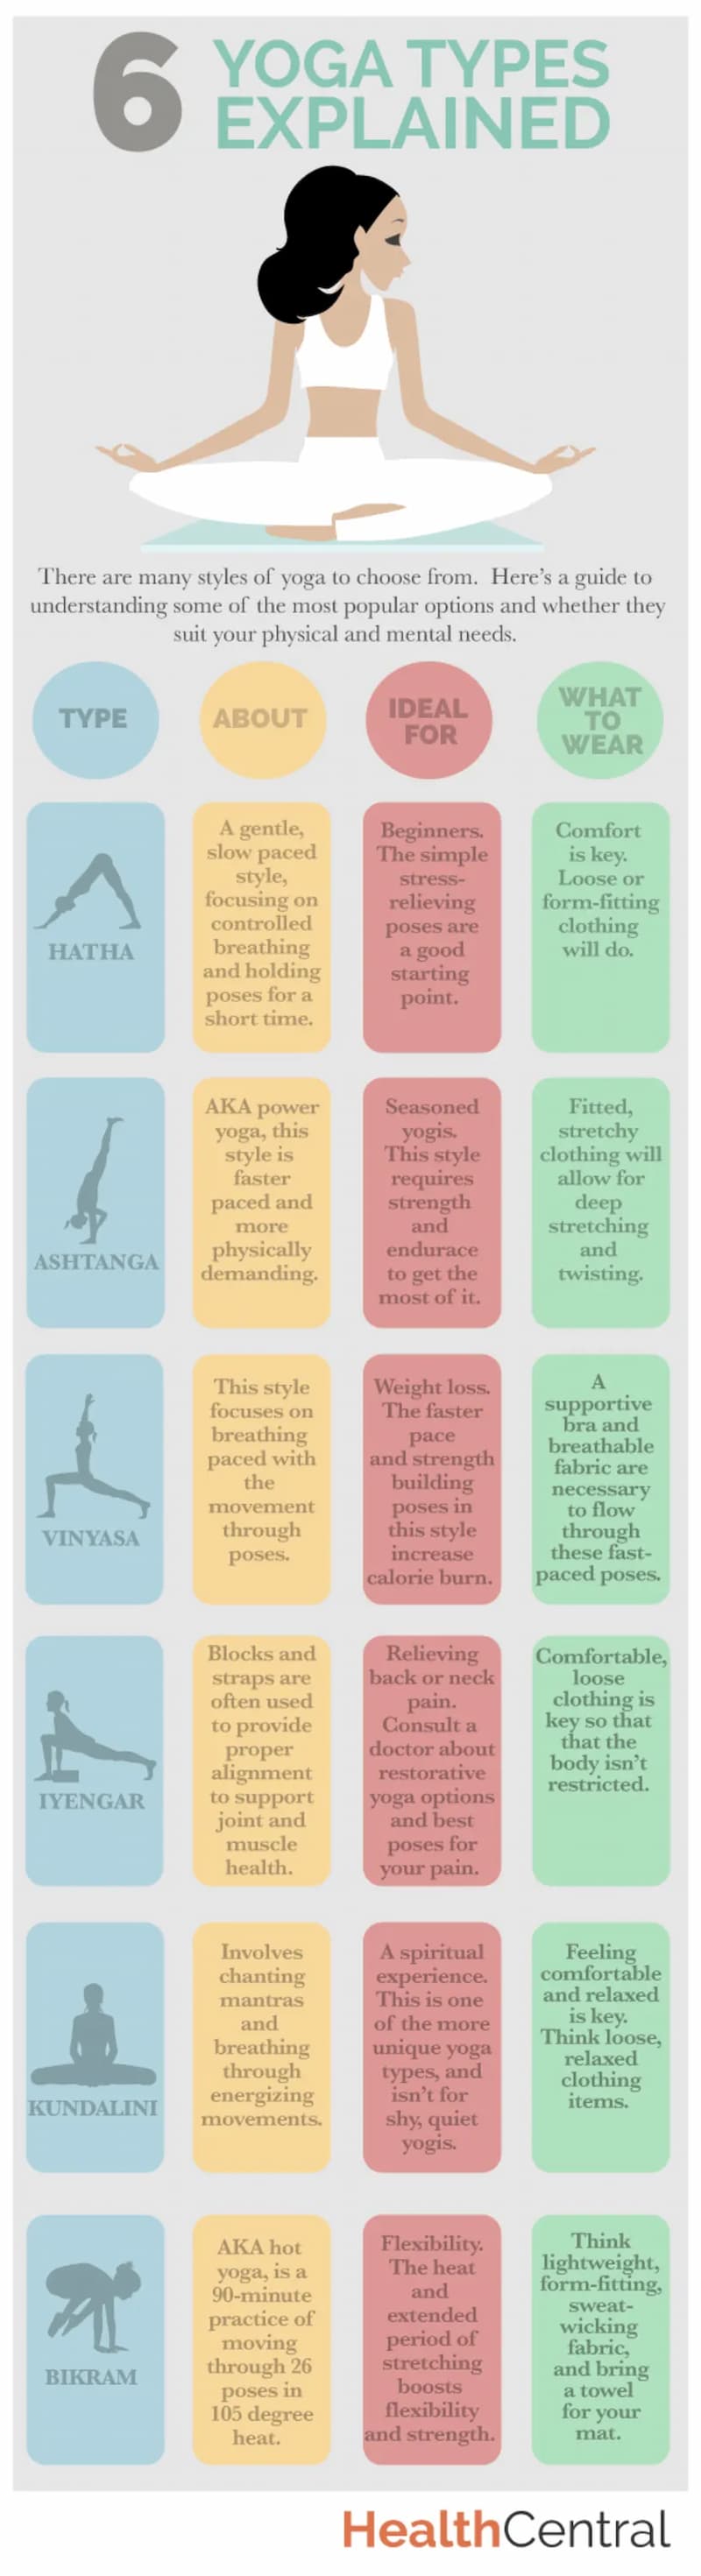 Different yoga styles